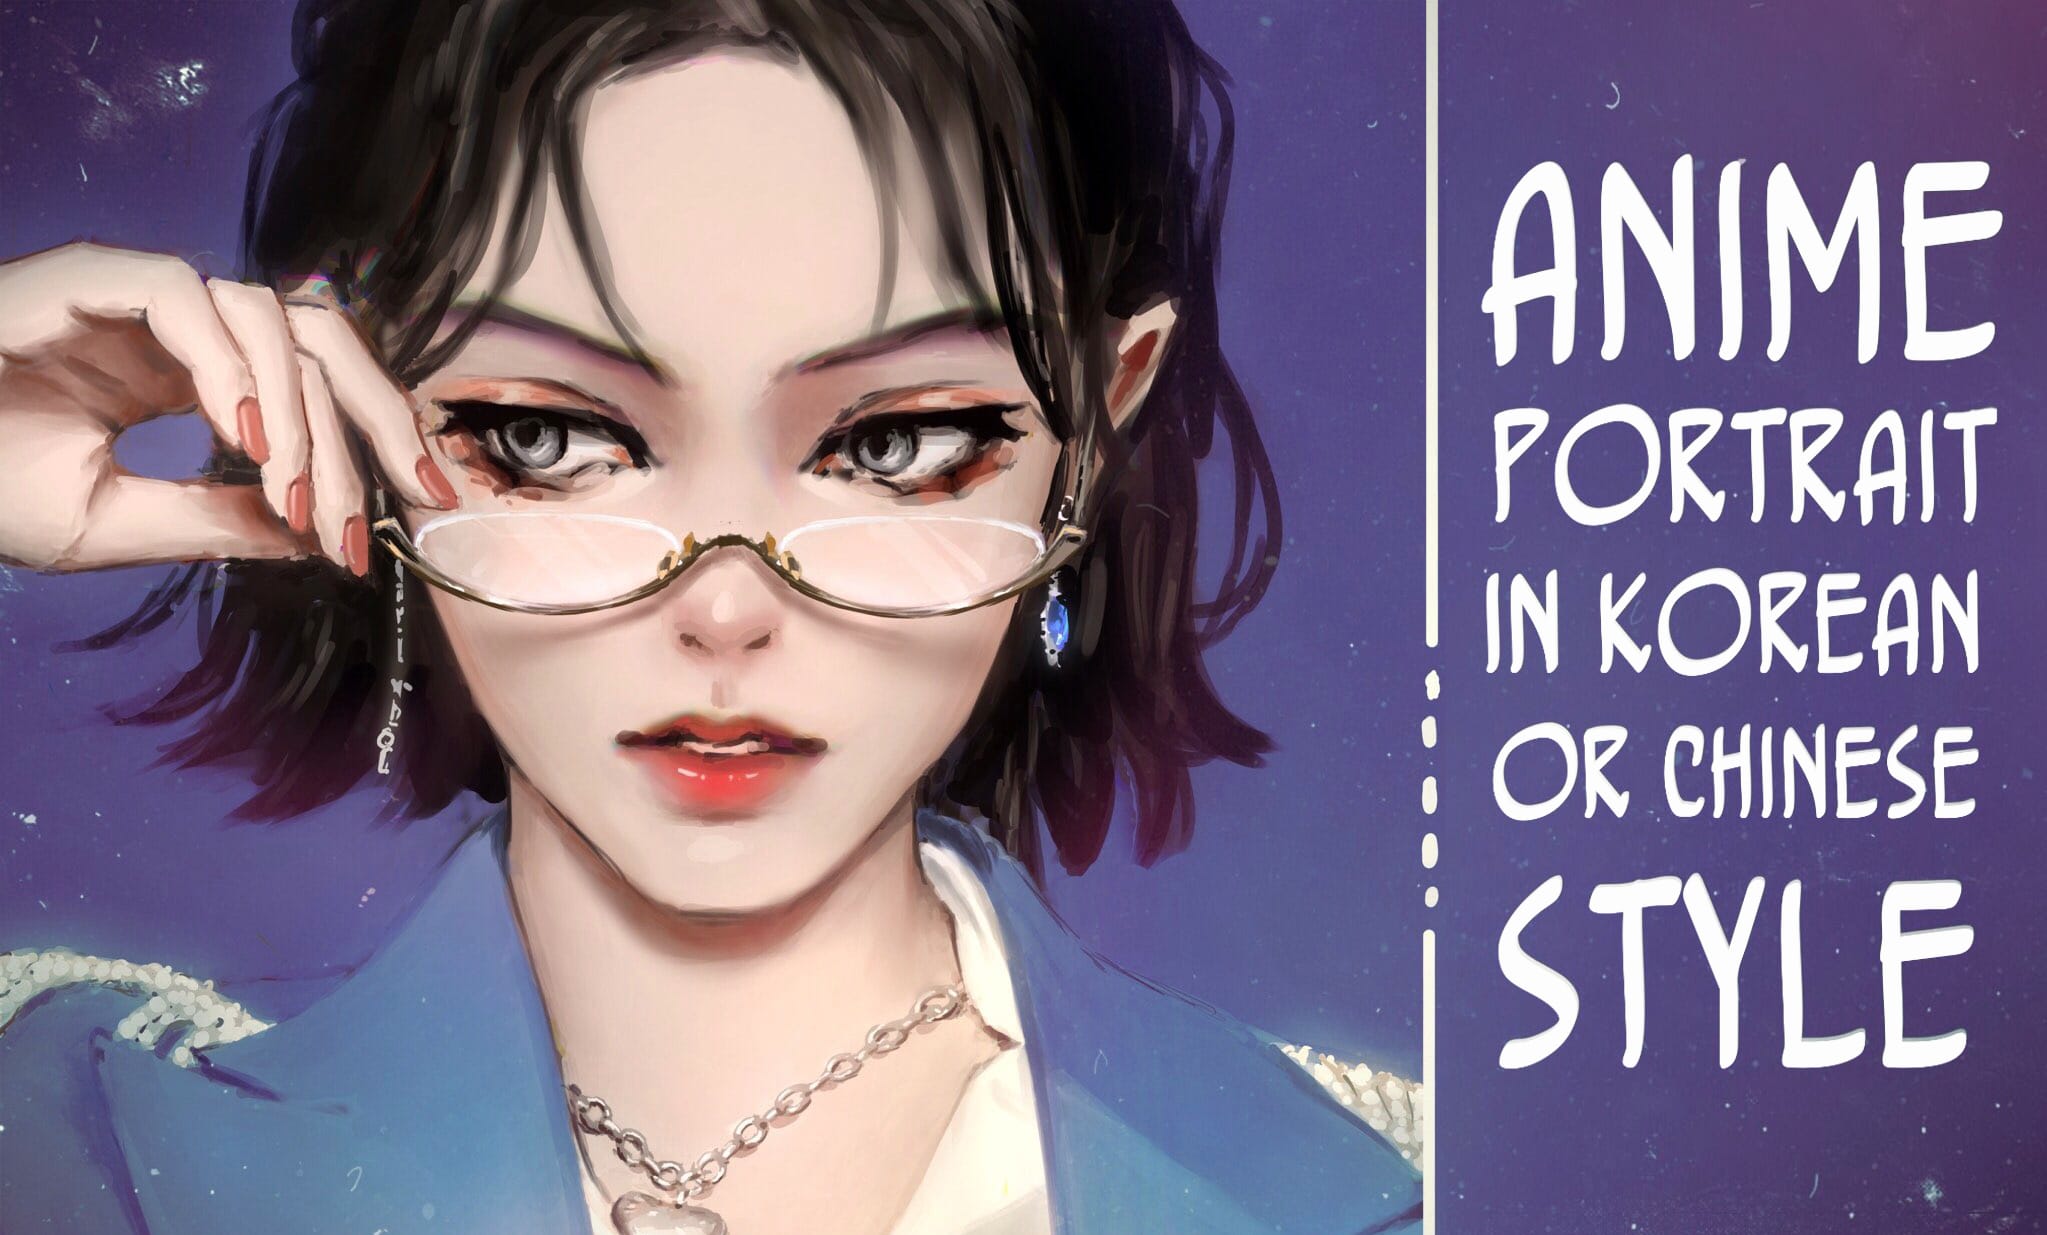 Draw your portrait in korean or chinese anime style by Mavka_2020 | Fiverr